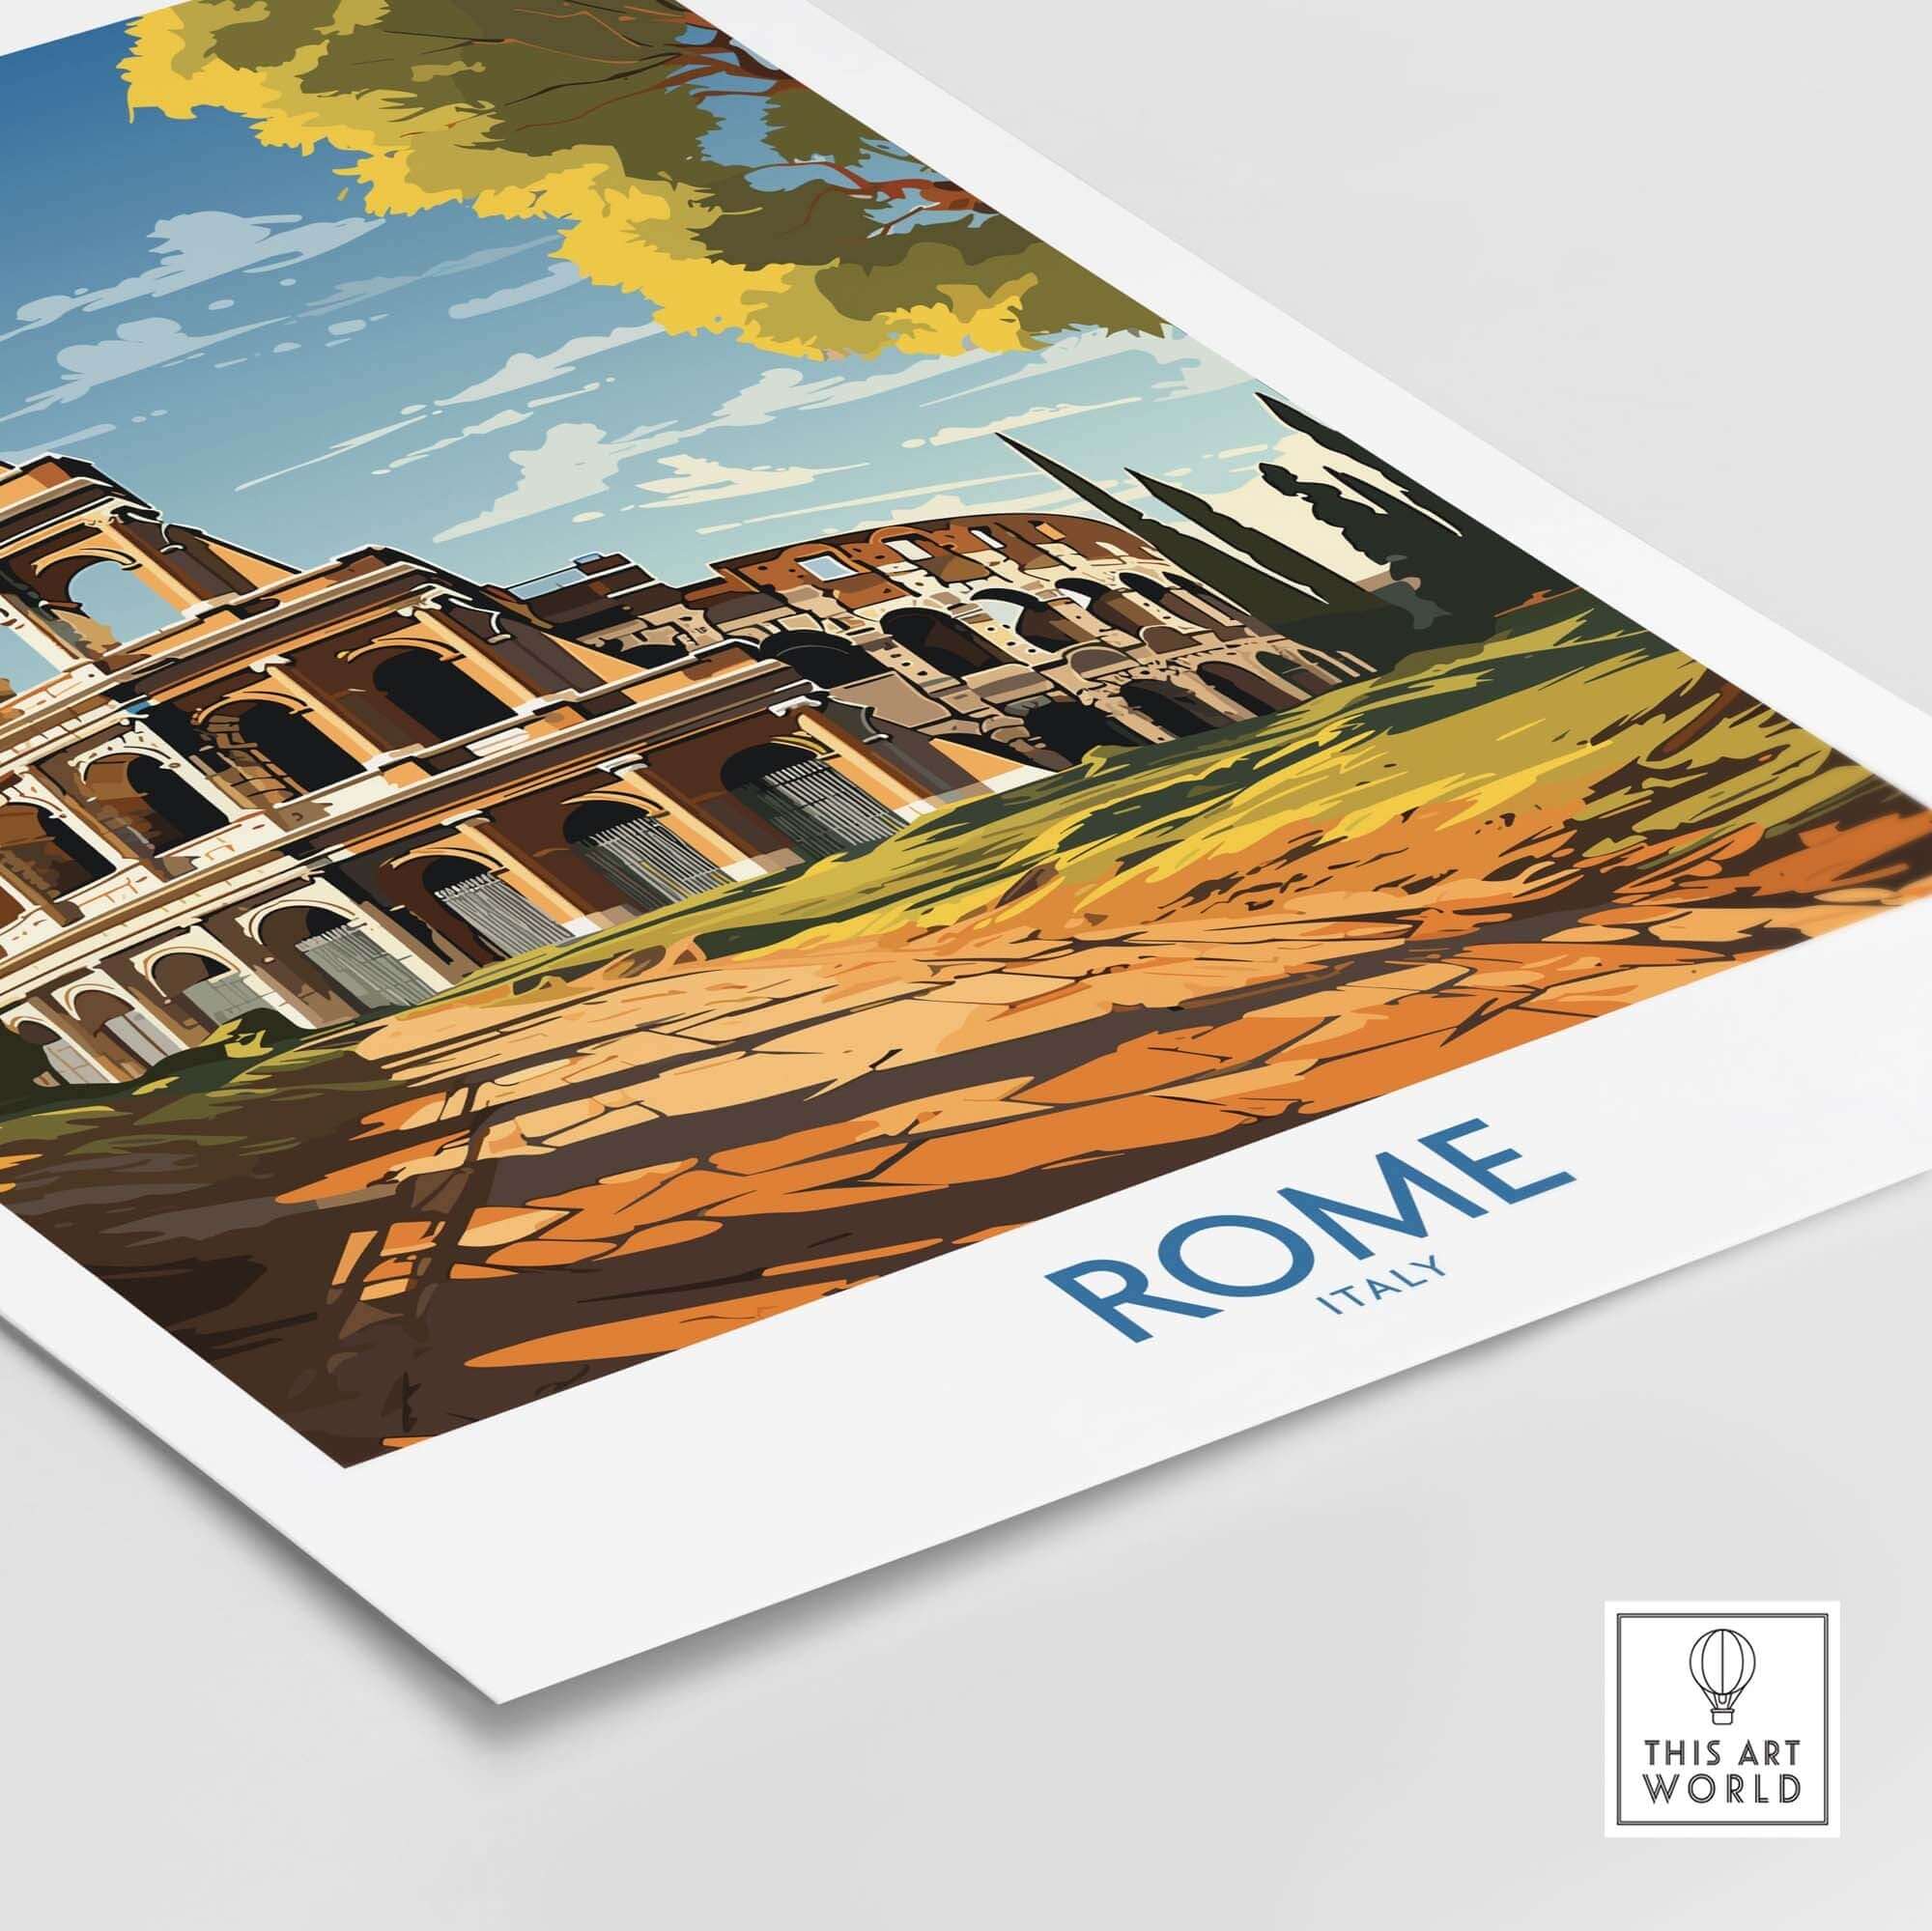 Rome Print with Colosseum